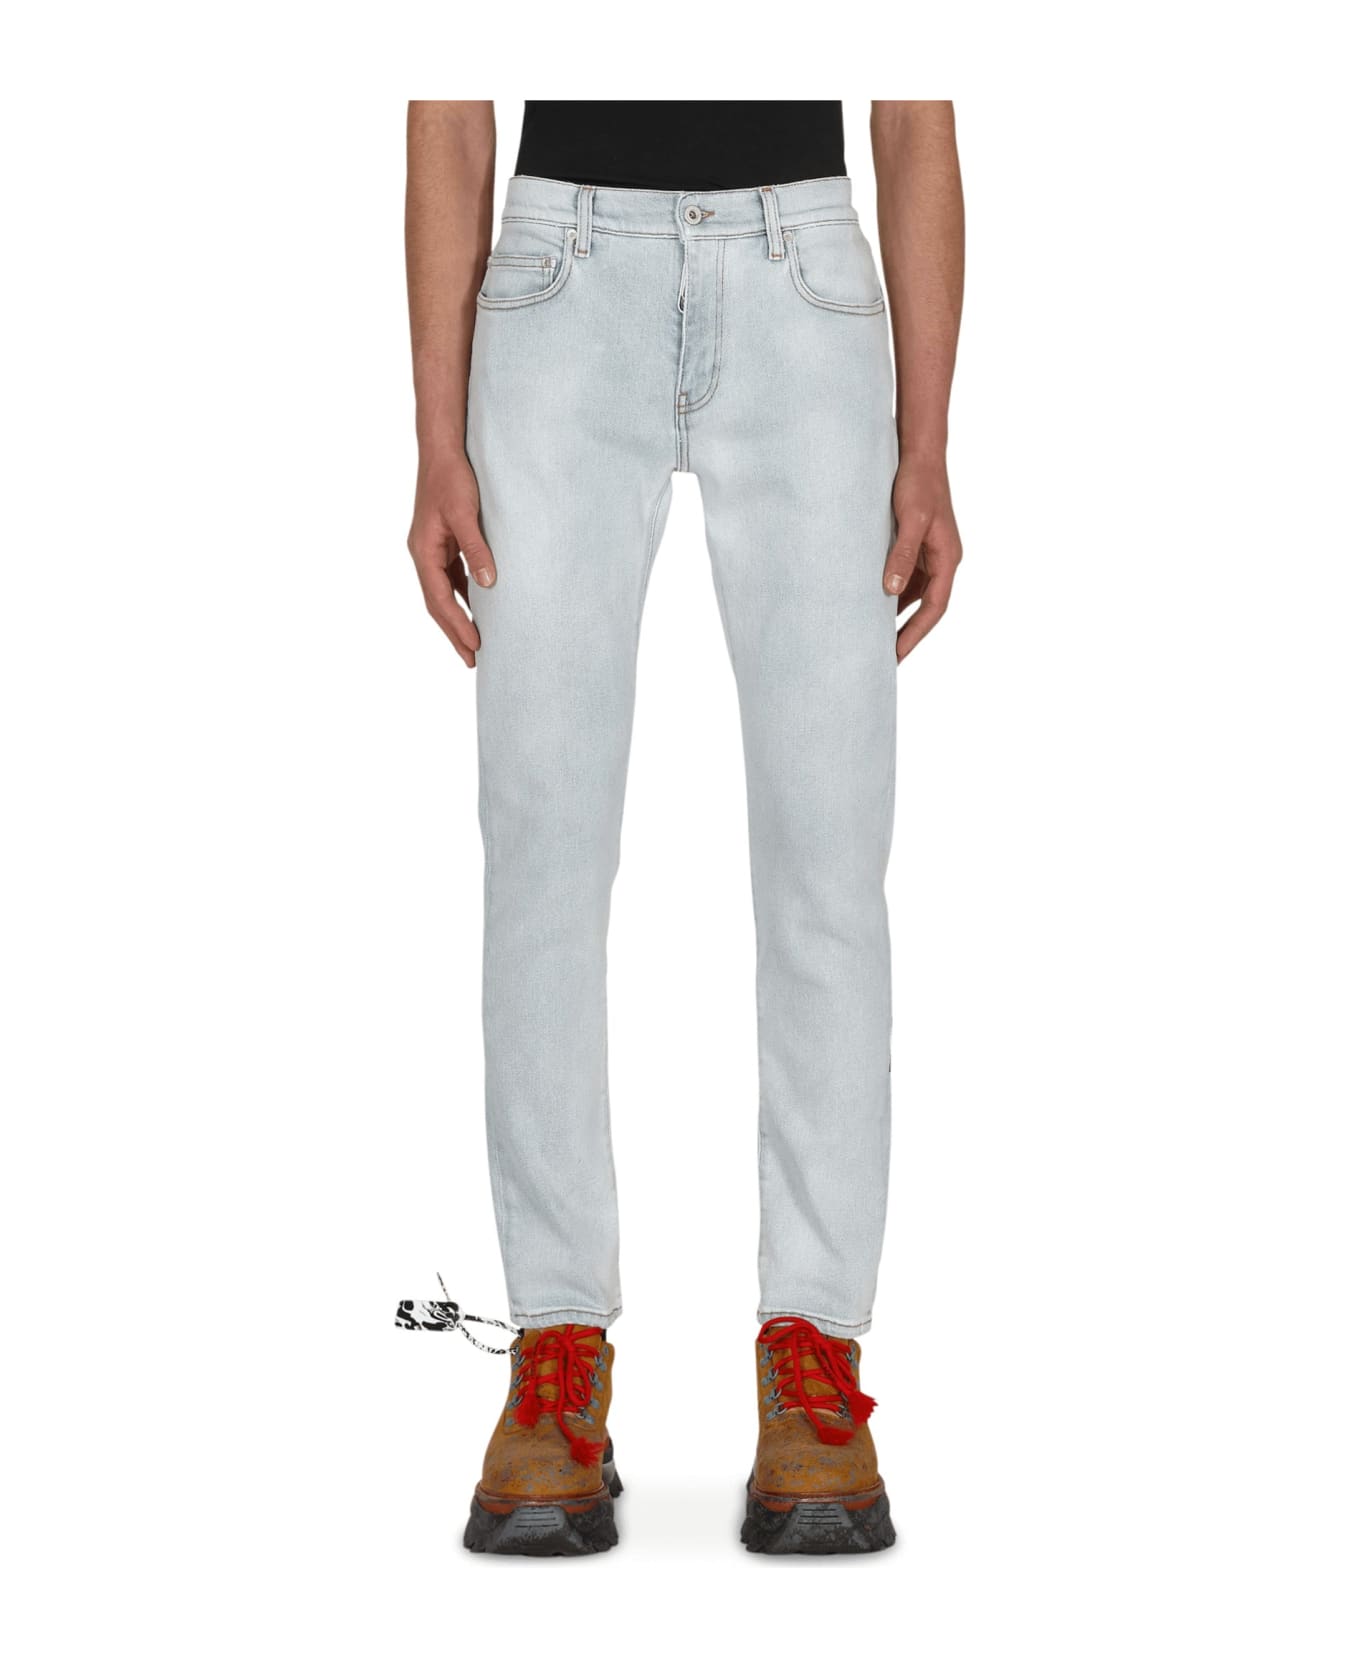 Off-White Skinny Jeans - Blue